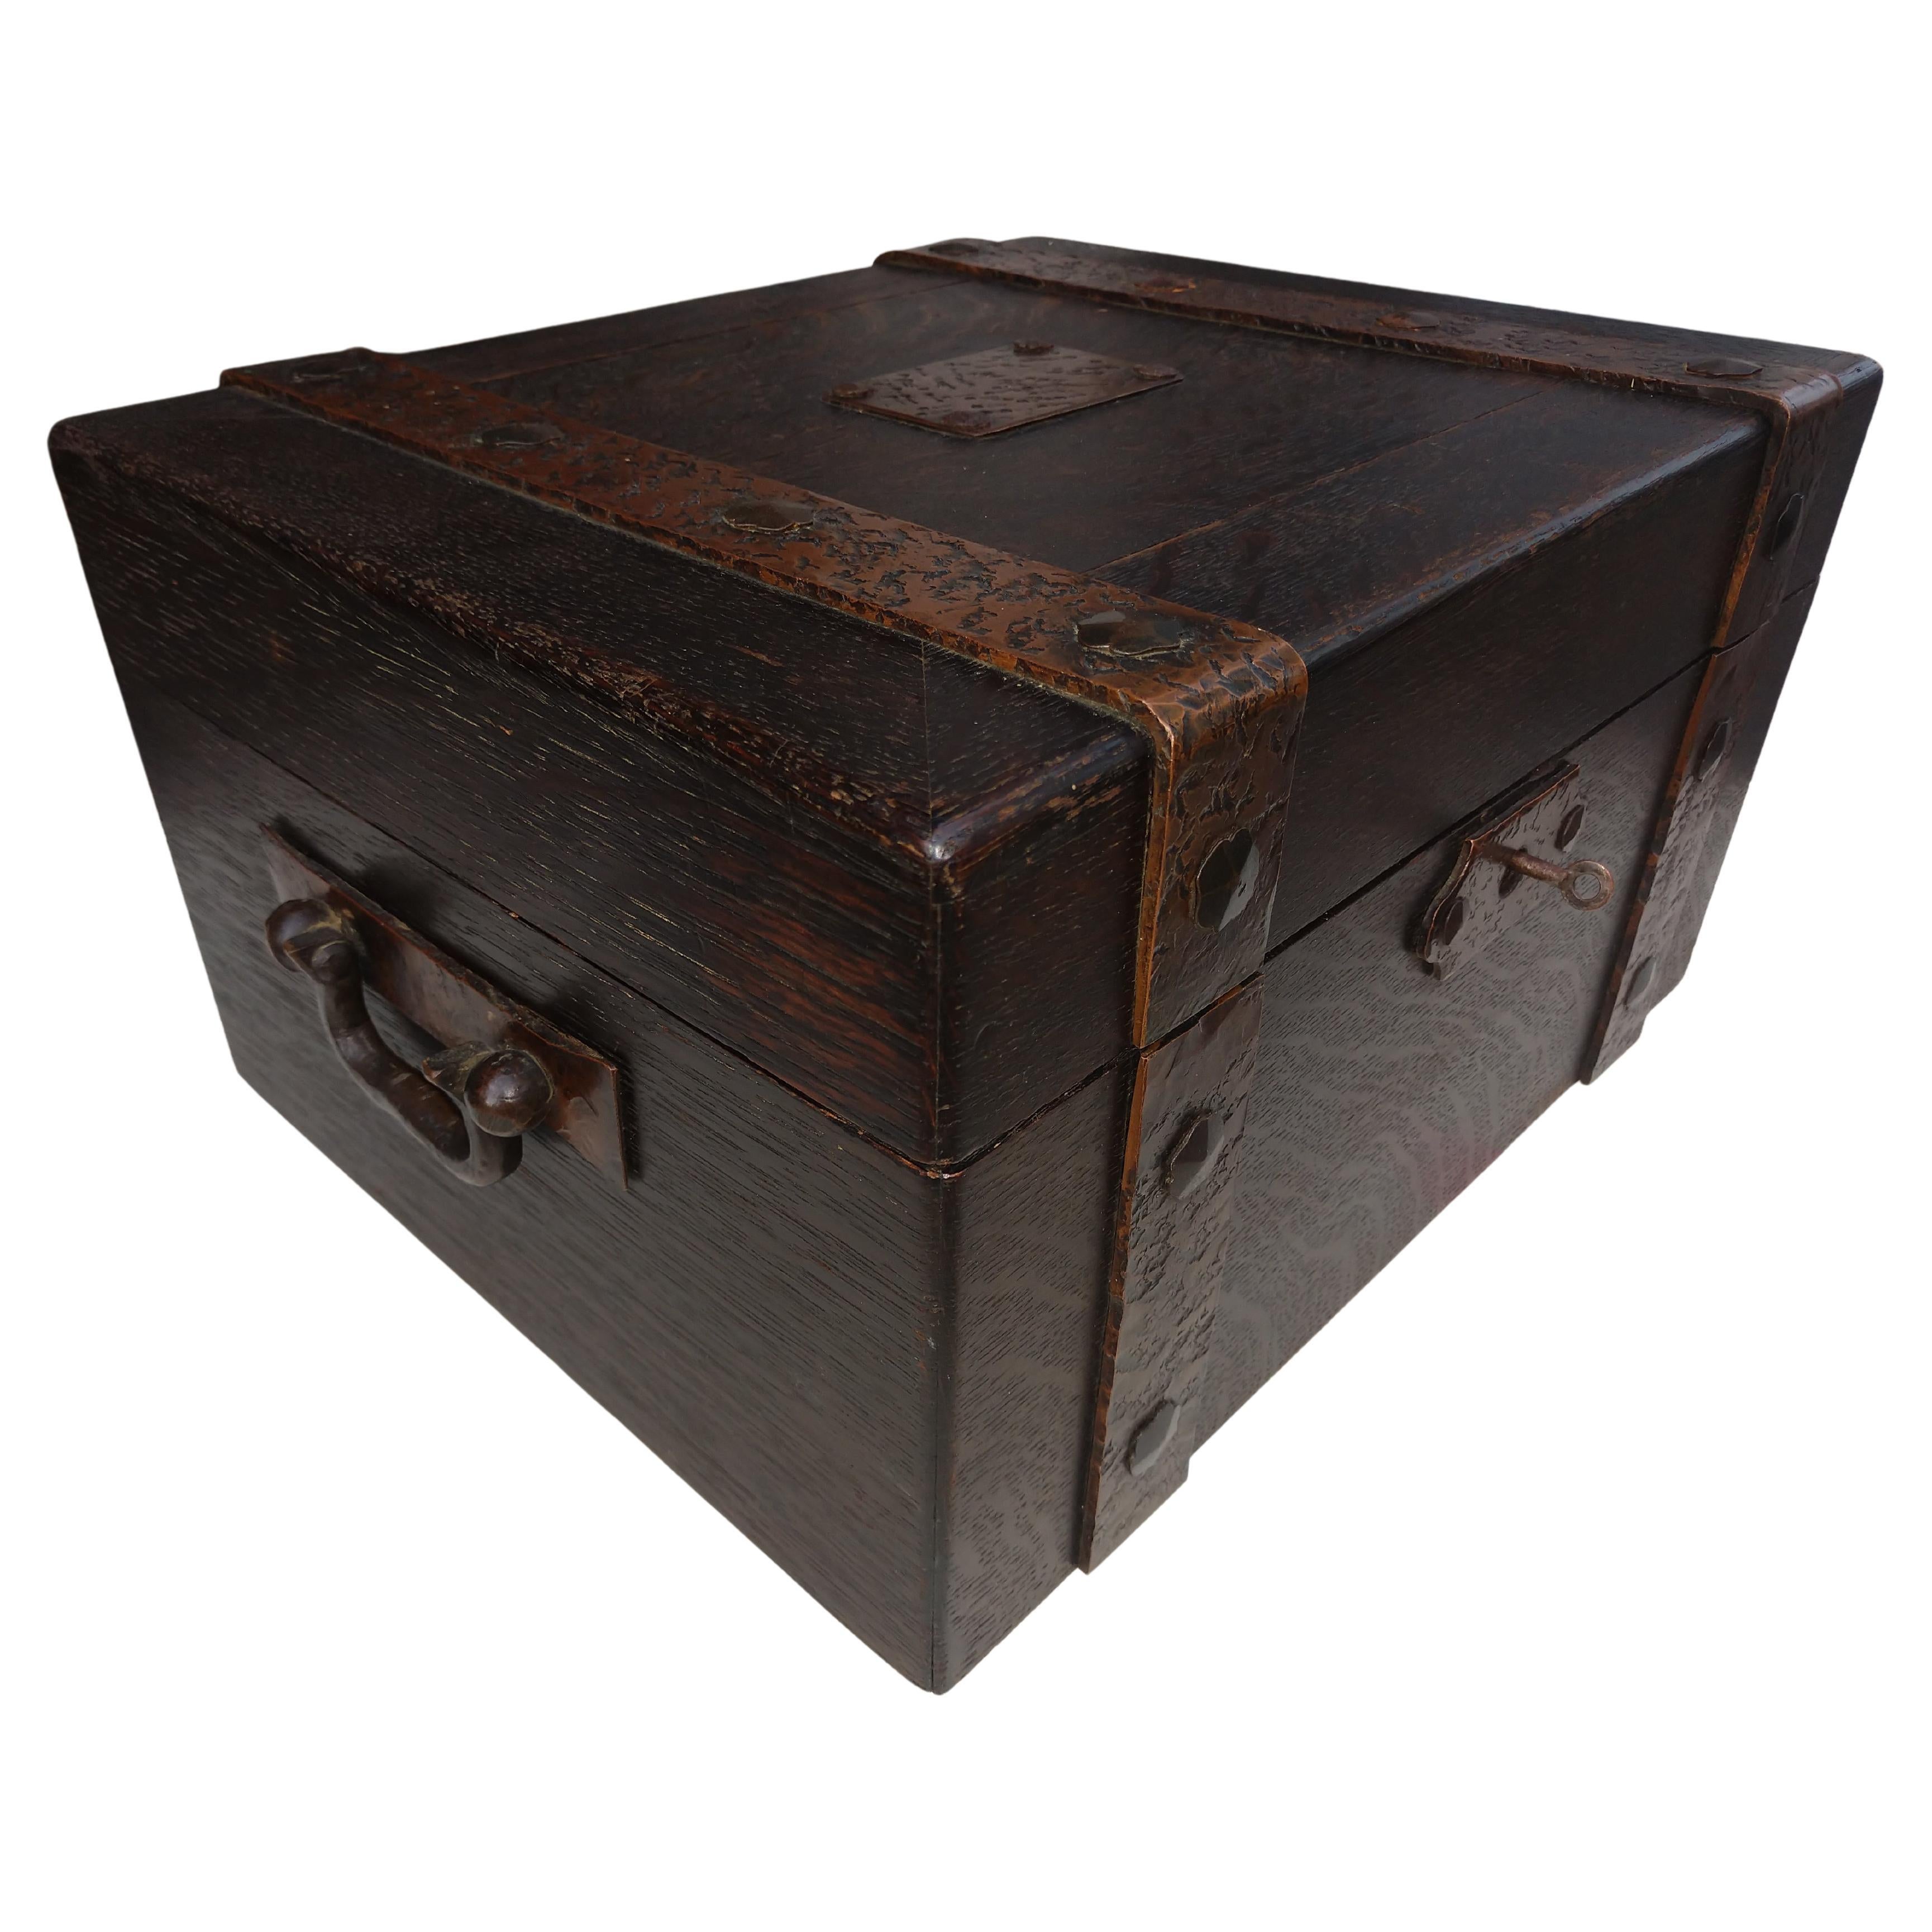 copper lined antique wooden humidor table with copper lining